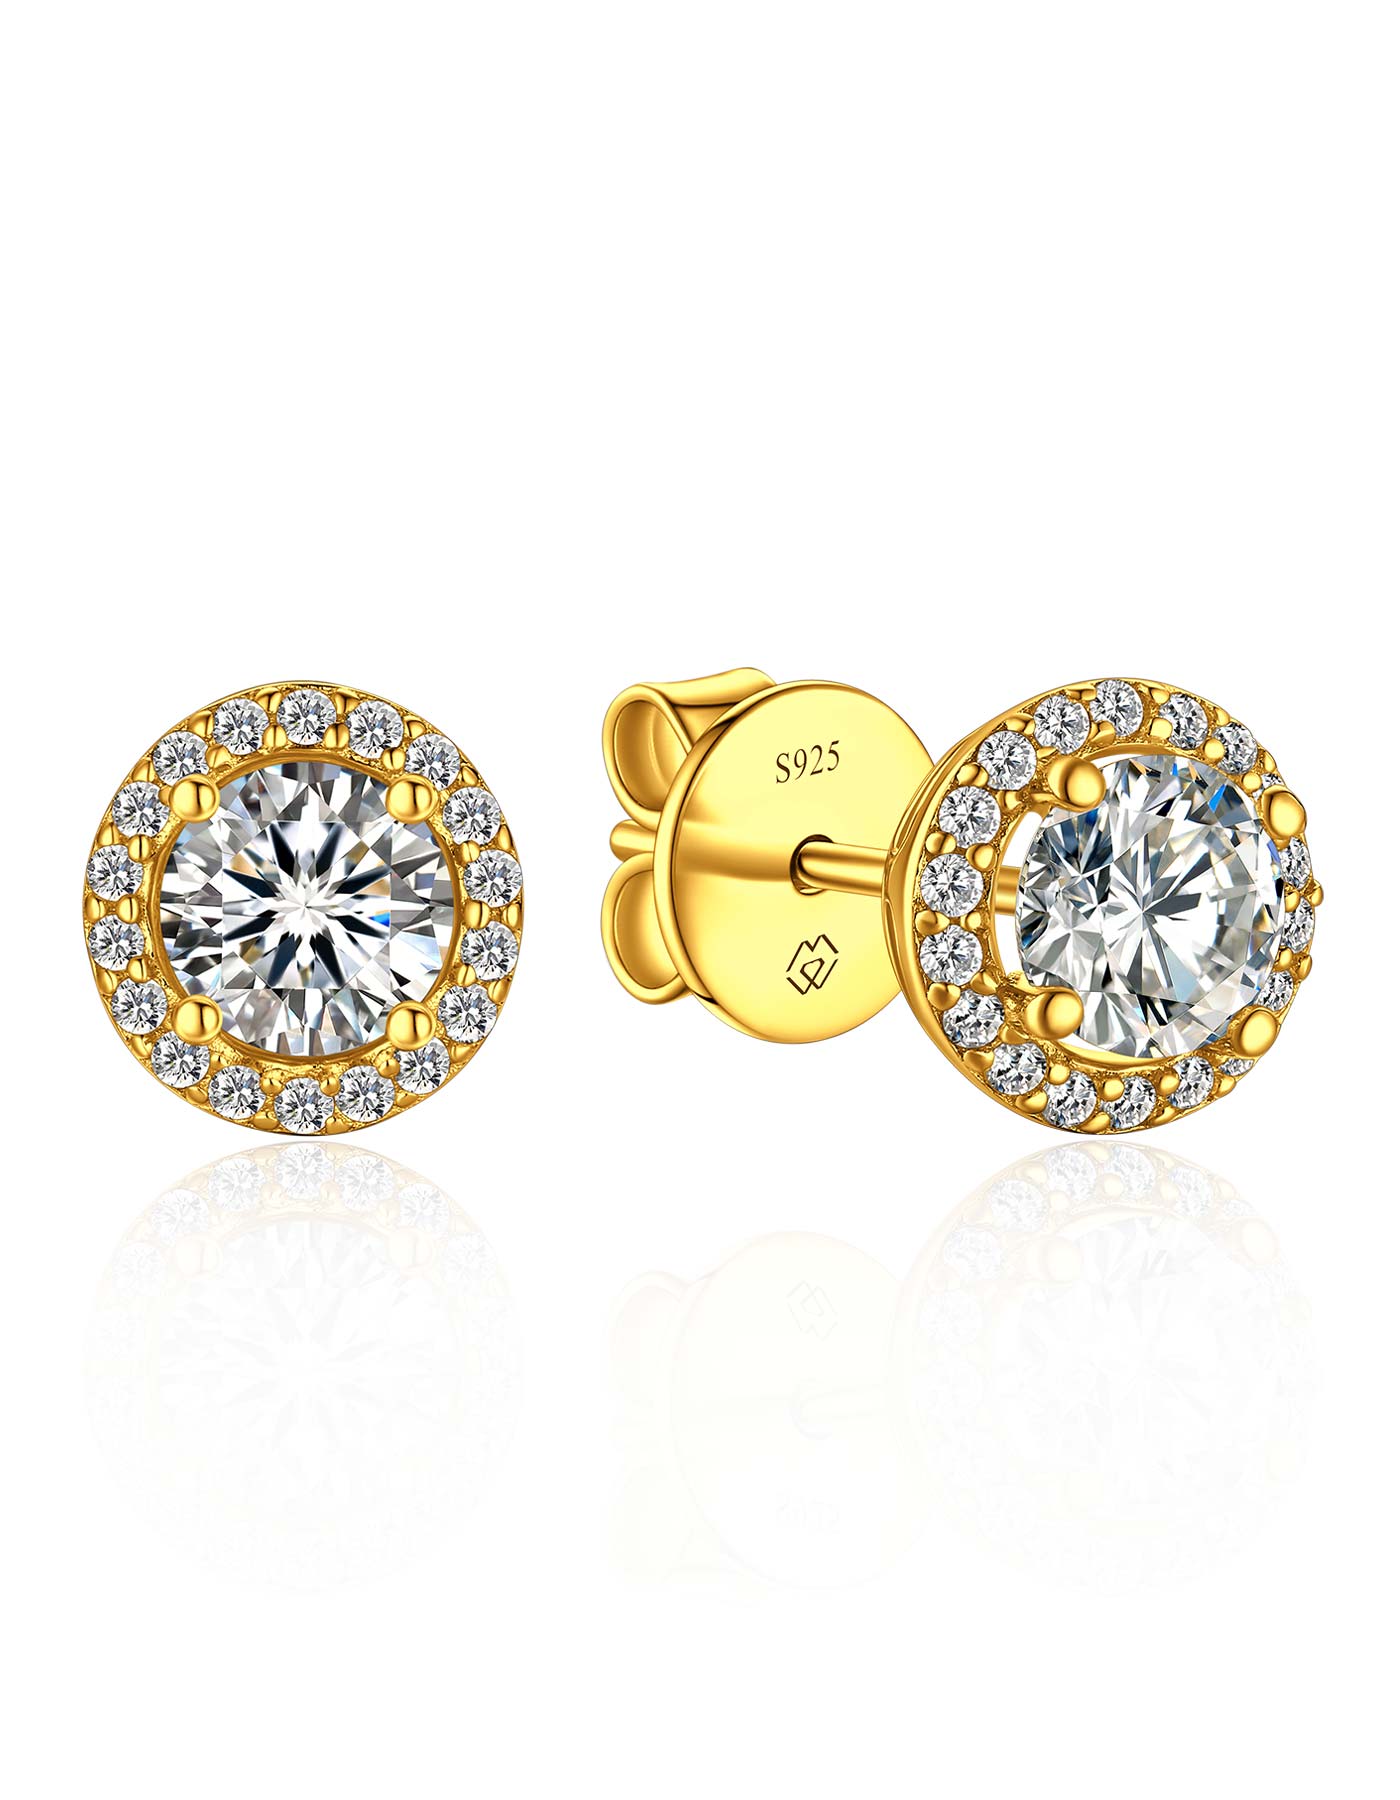 MomentWish Gold Plated Halo Moissanite Stud Earrings